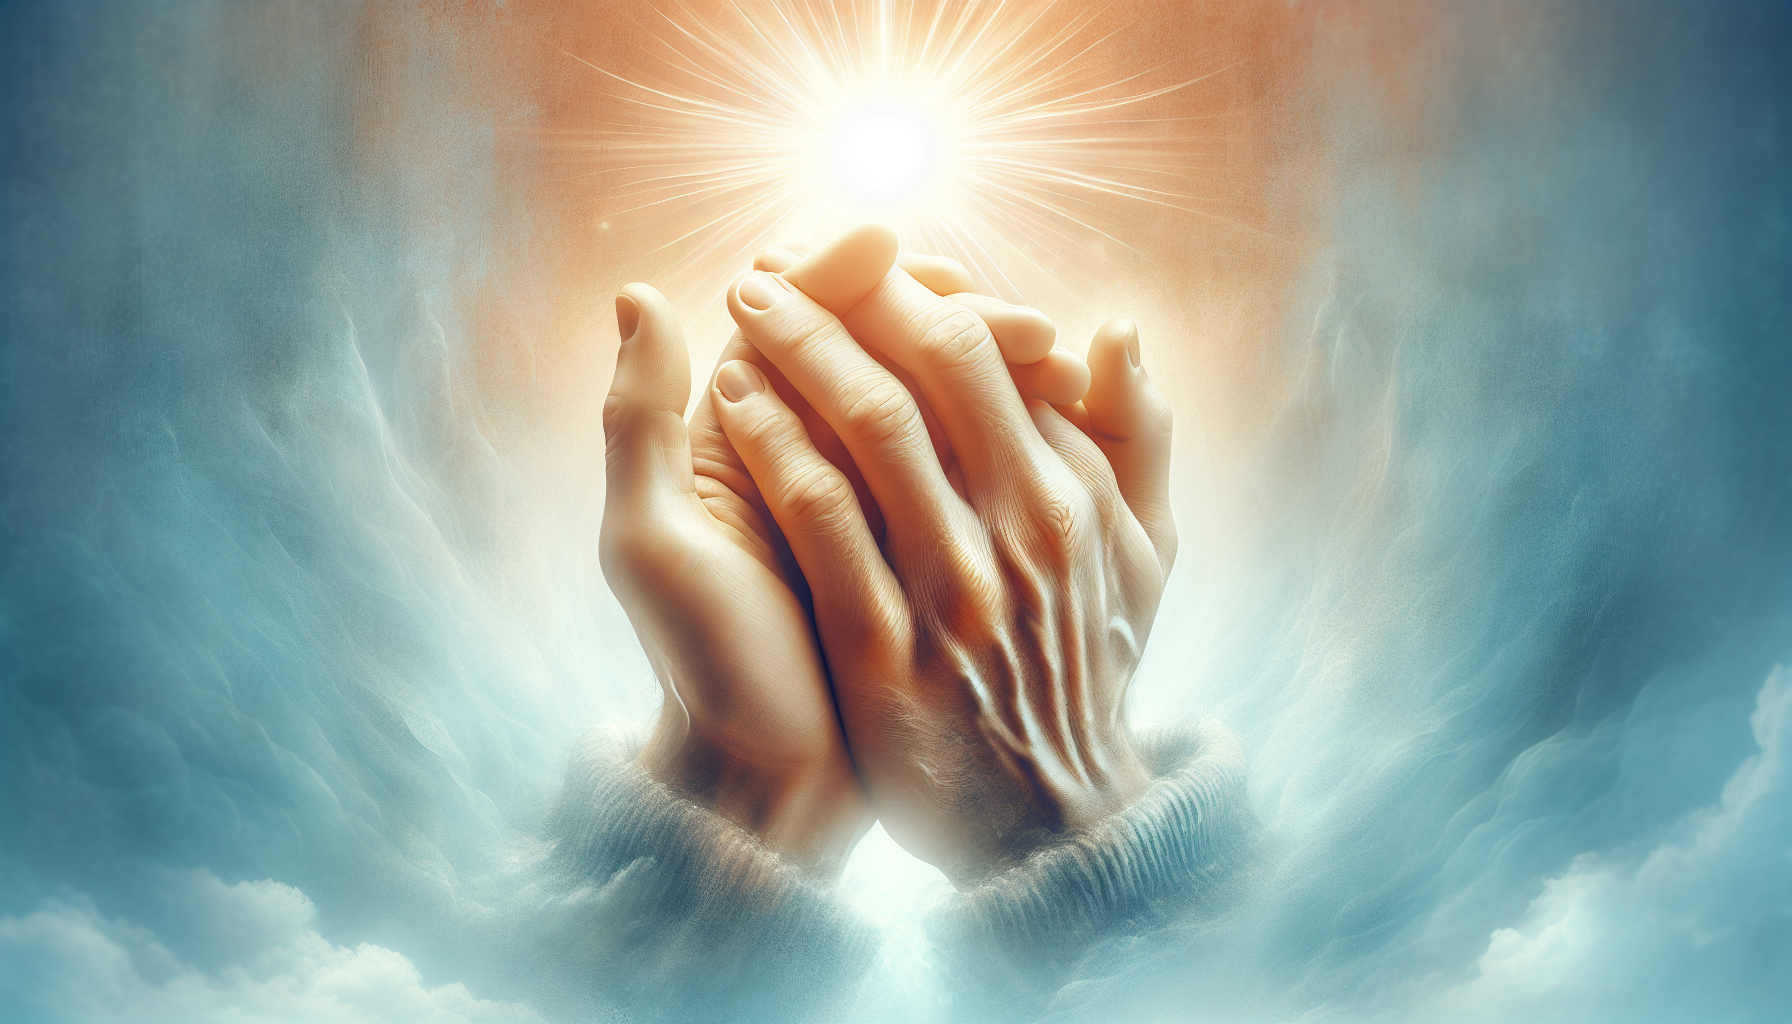 Hands clasped in prayer with a radiant light shining from above